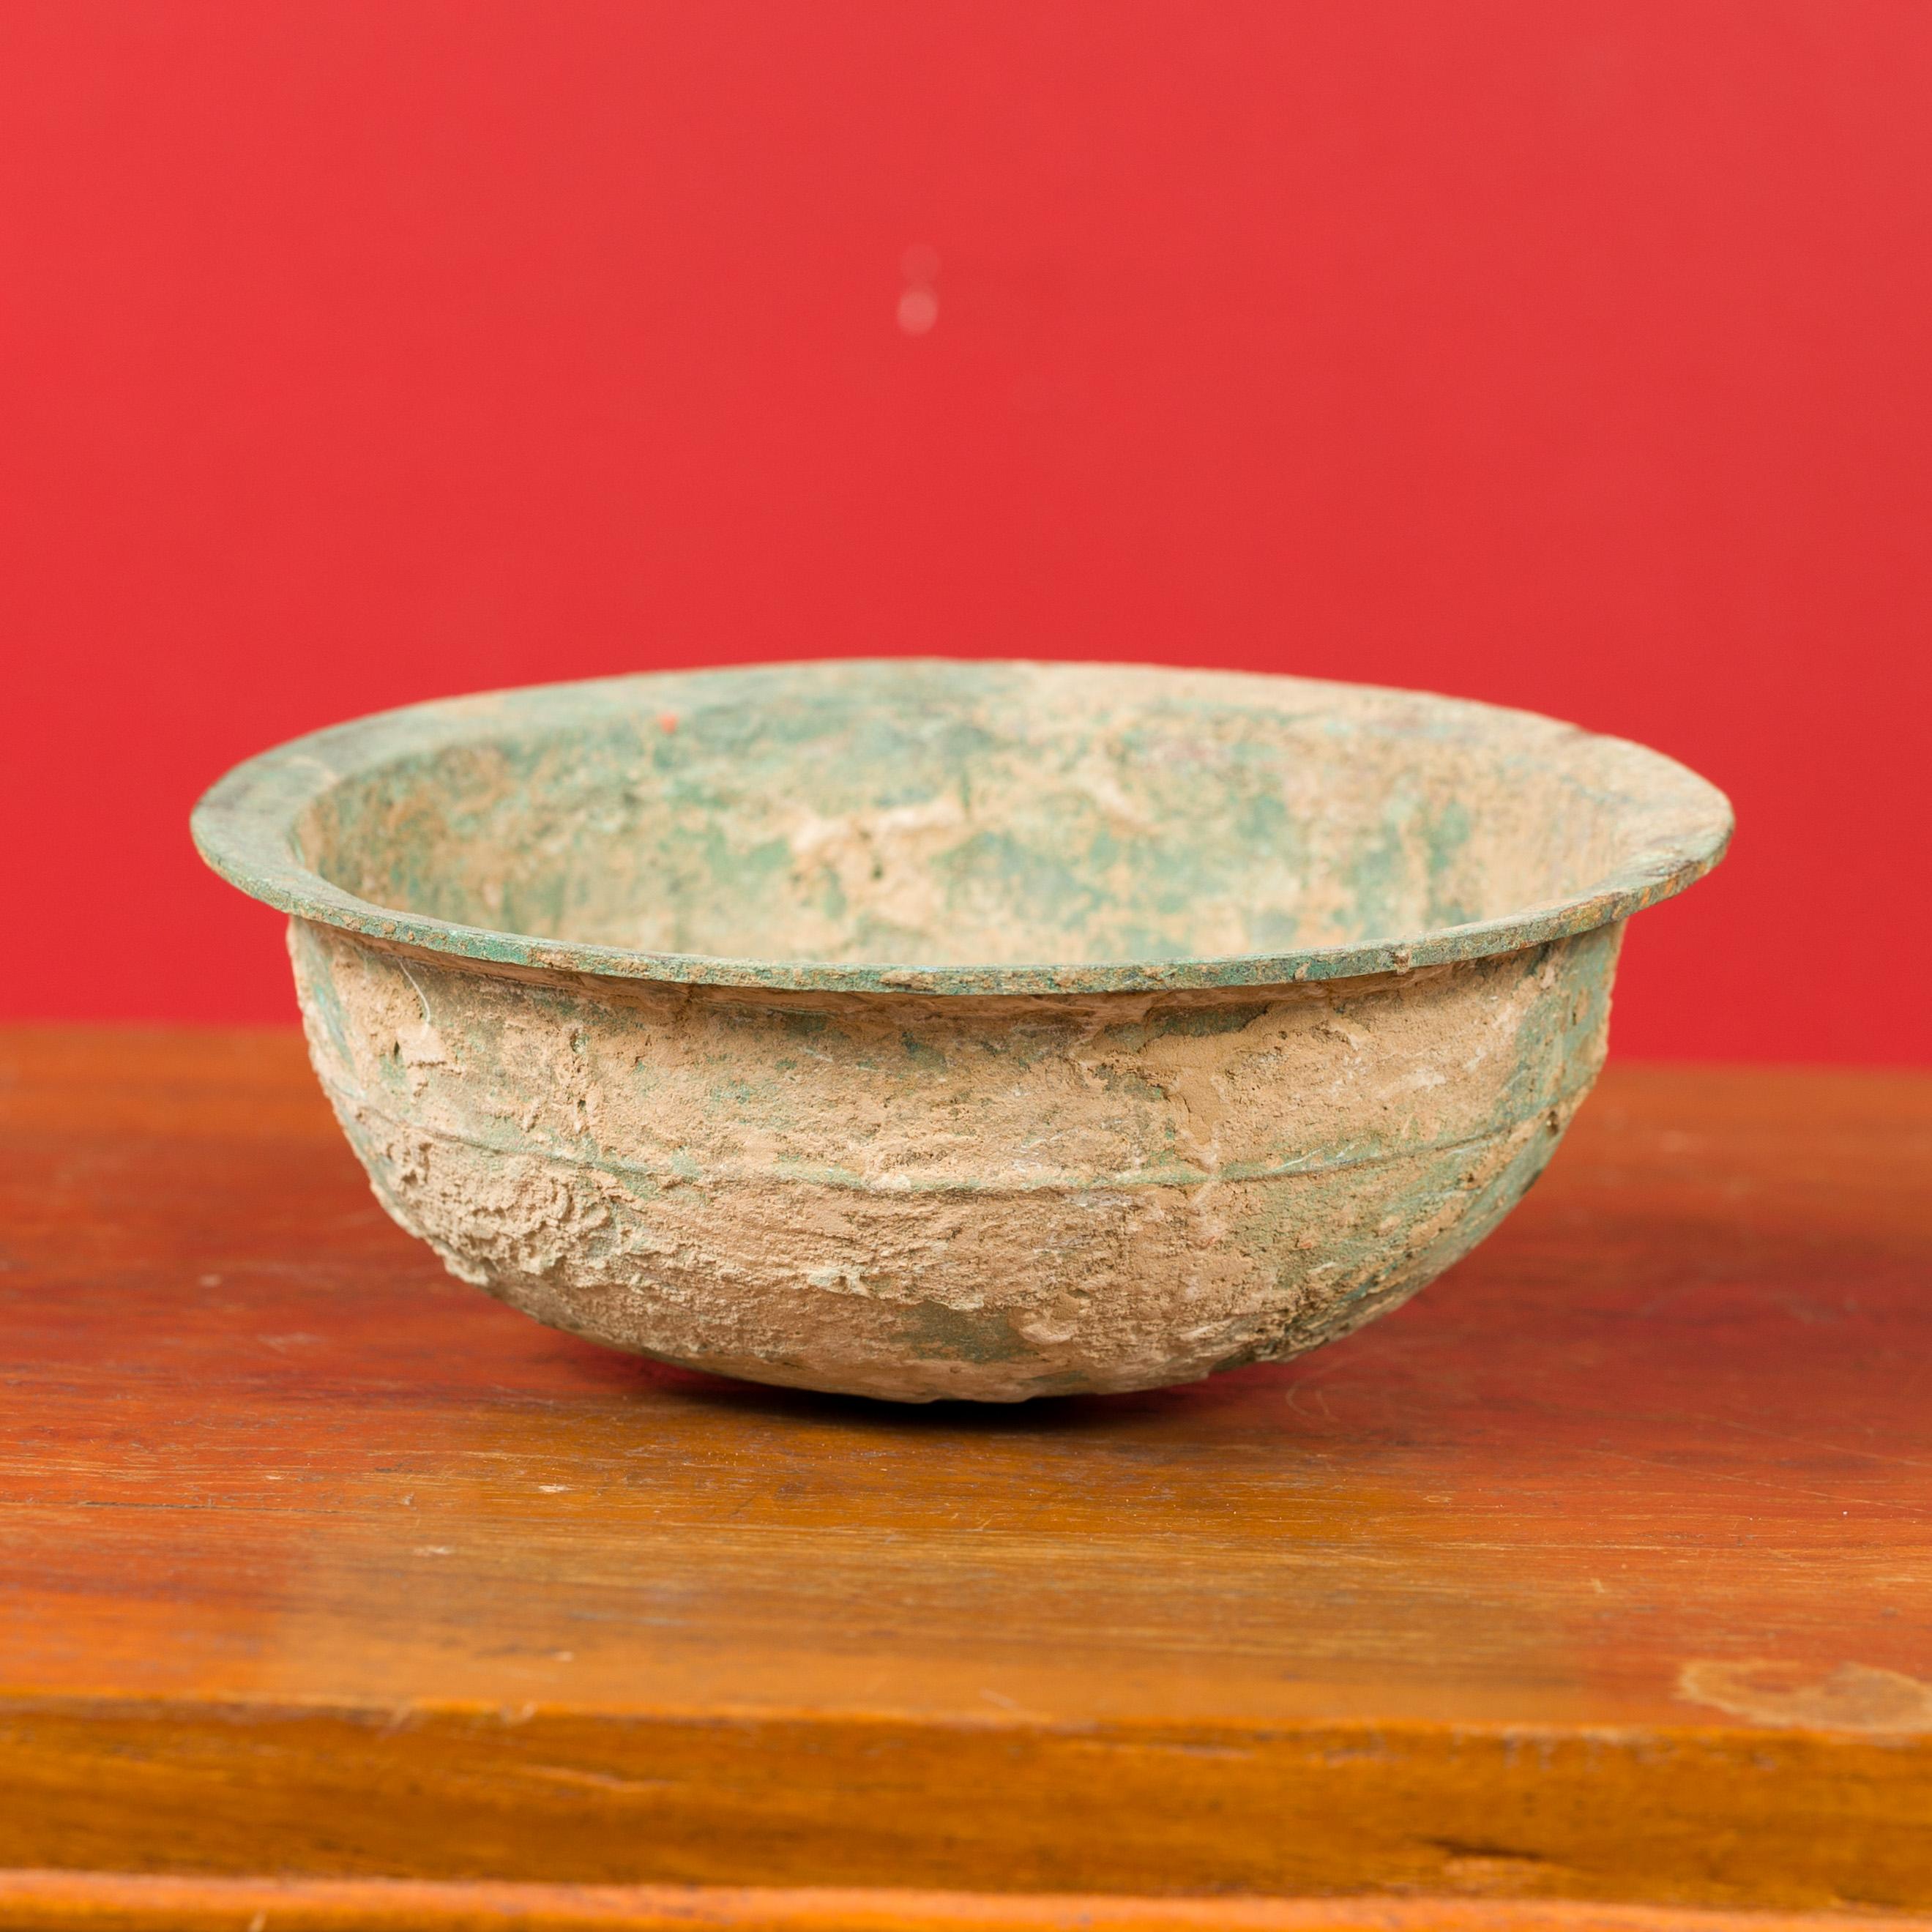 Chinese Han Dynasty Bronze Bowl circa 202 BC-200 AD with Mineral Deposits 1